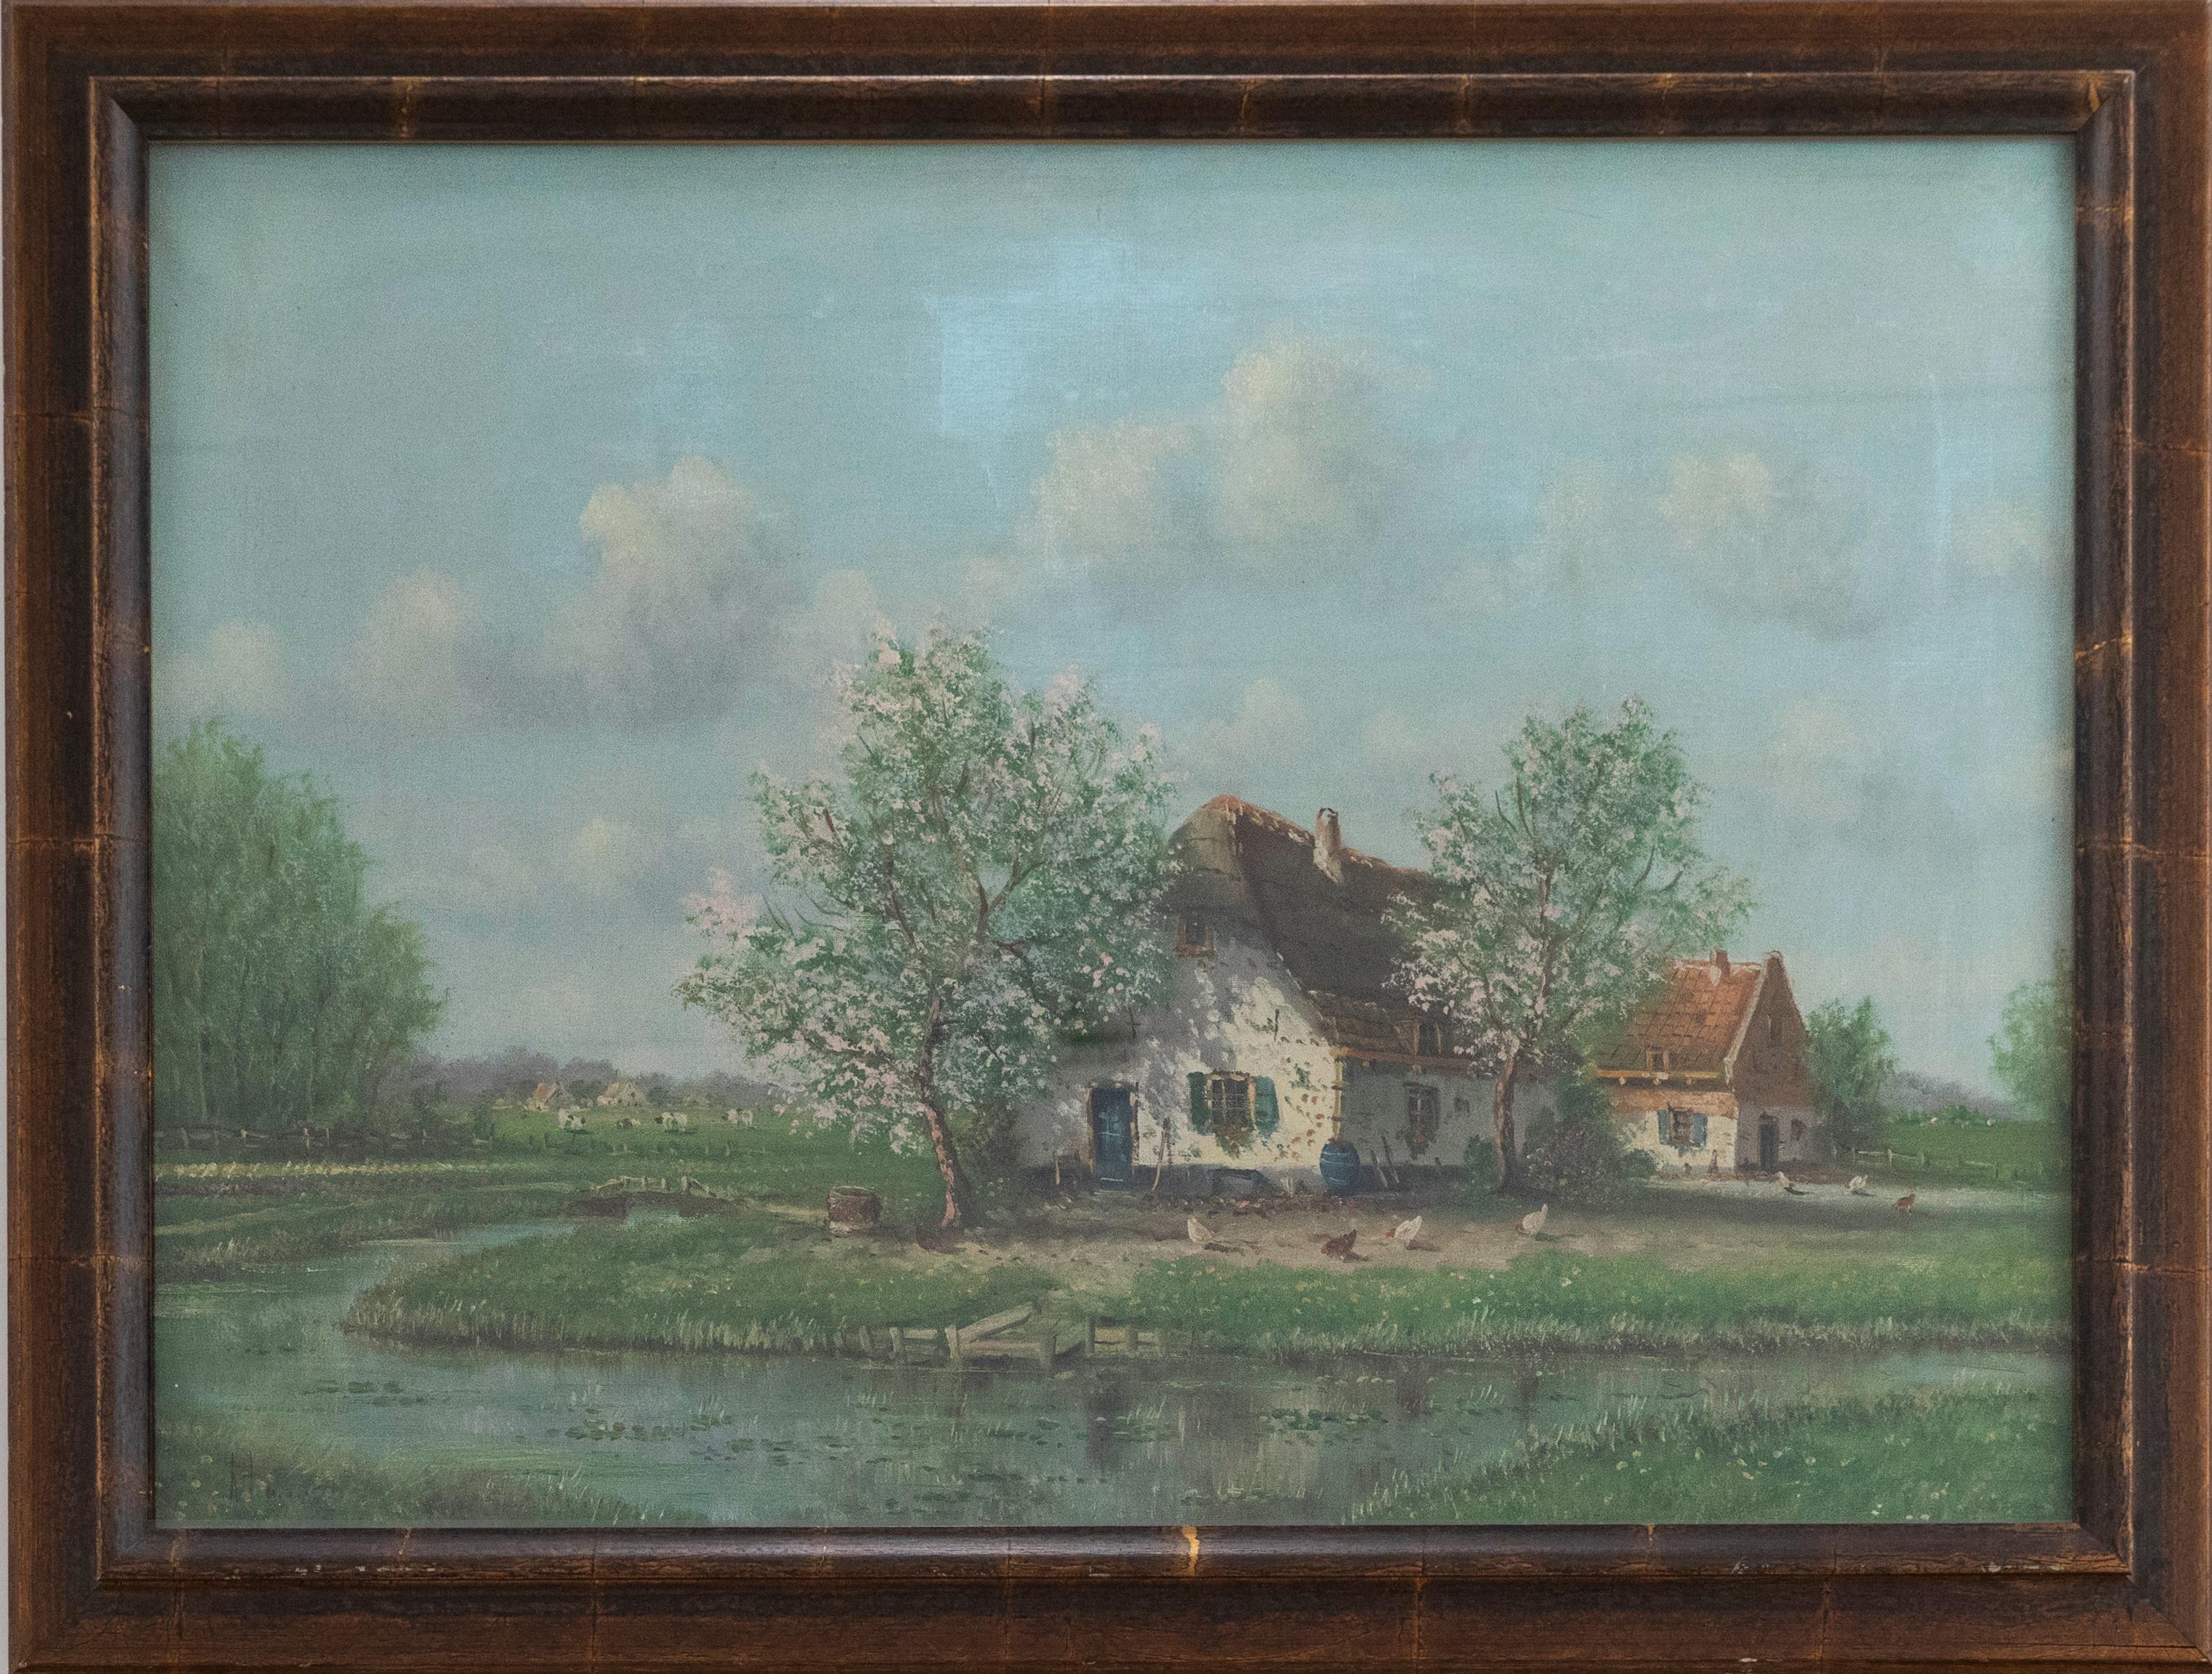 A charming oil depiction of a Scandinavian Farmstead in high summer. Chicken roam by a small stream and cattle graze in distant fields. there artist captures the soft summer light hitting the walls of the farmhouse, lightly obscured by the shadows